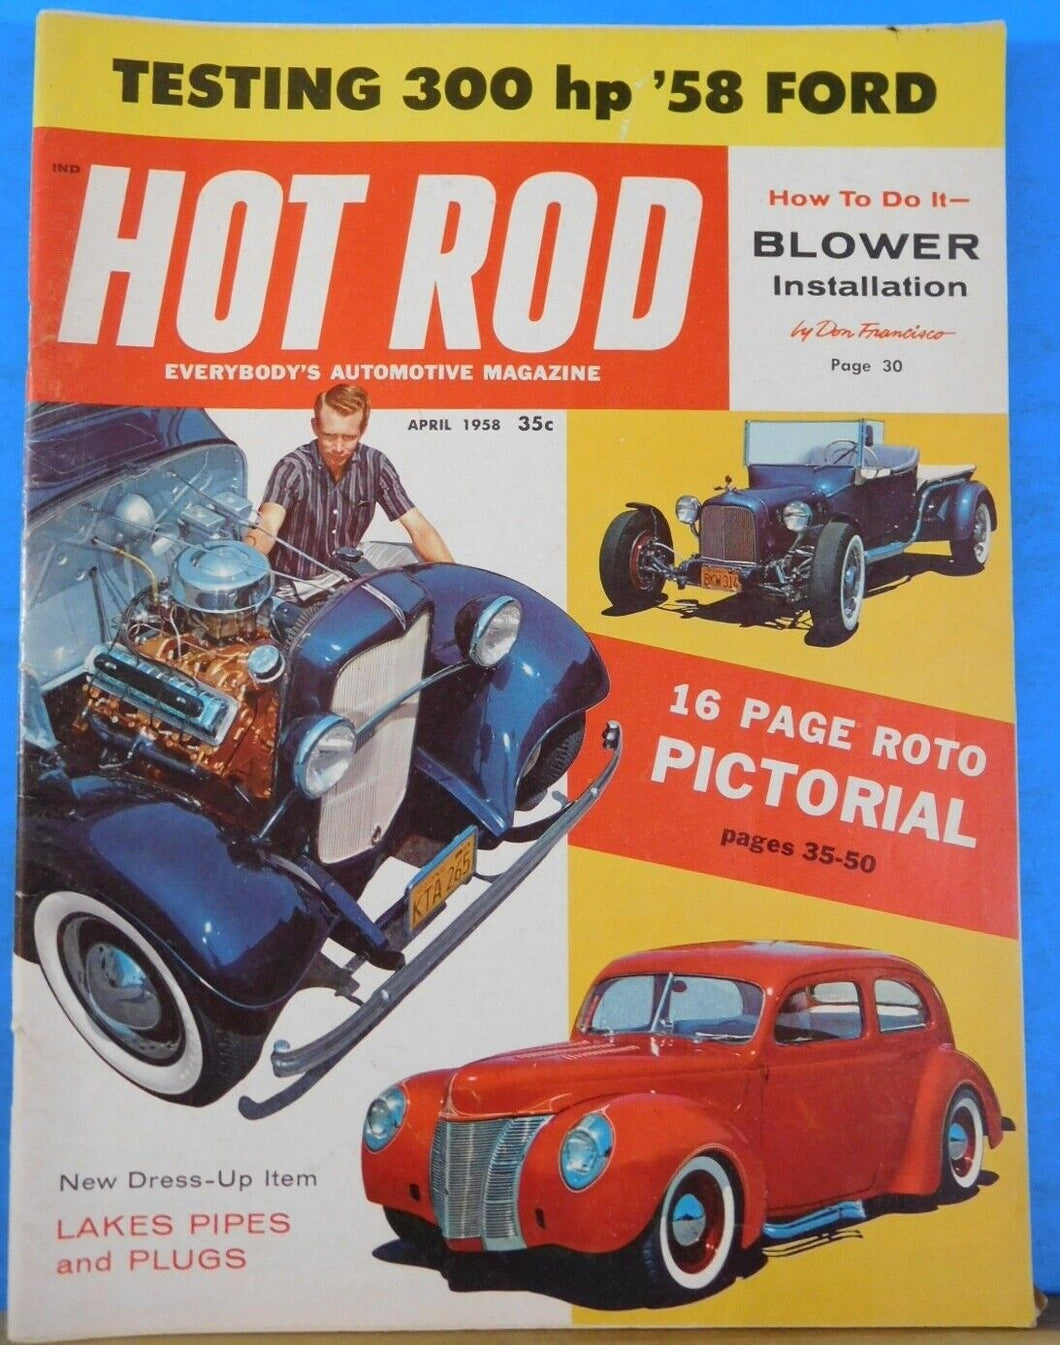 Hot Rod 1958 April Blower Installation How to do it 1958 Ford